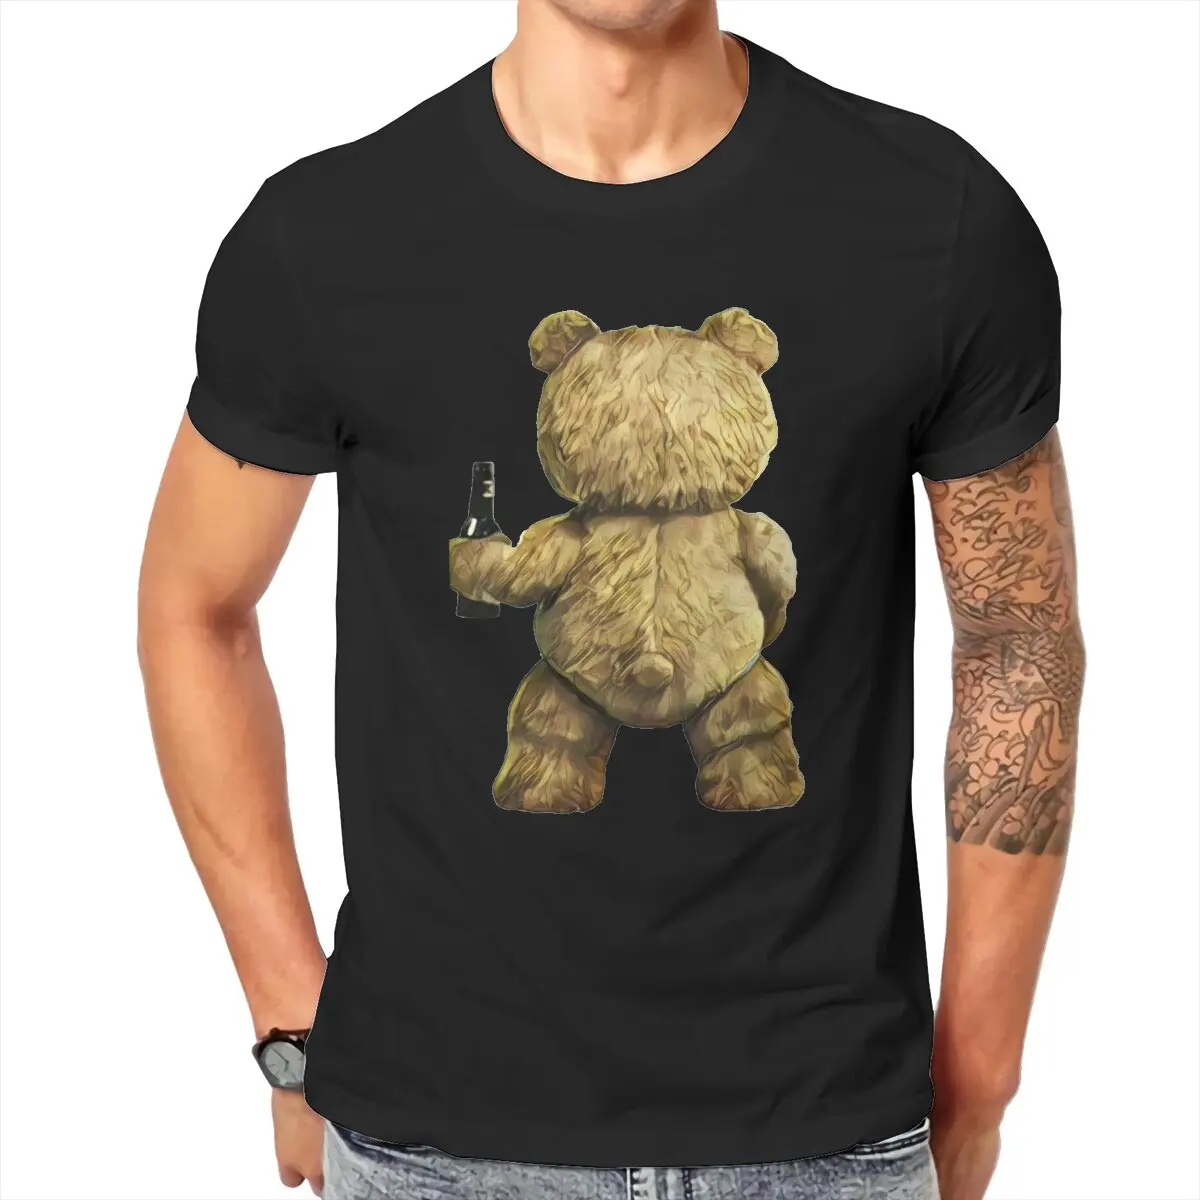 

Teddy Bear Ted T Shirts Men's Pure Cotton Fun T-Shirt O Neck Have A Drink And Have Fun Tee Shirt Short Sleeve Tops Plus Size